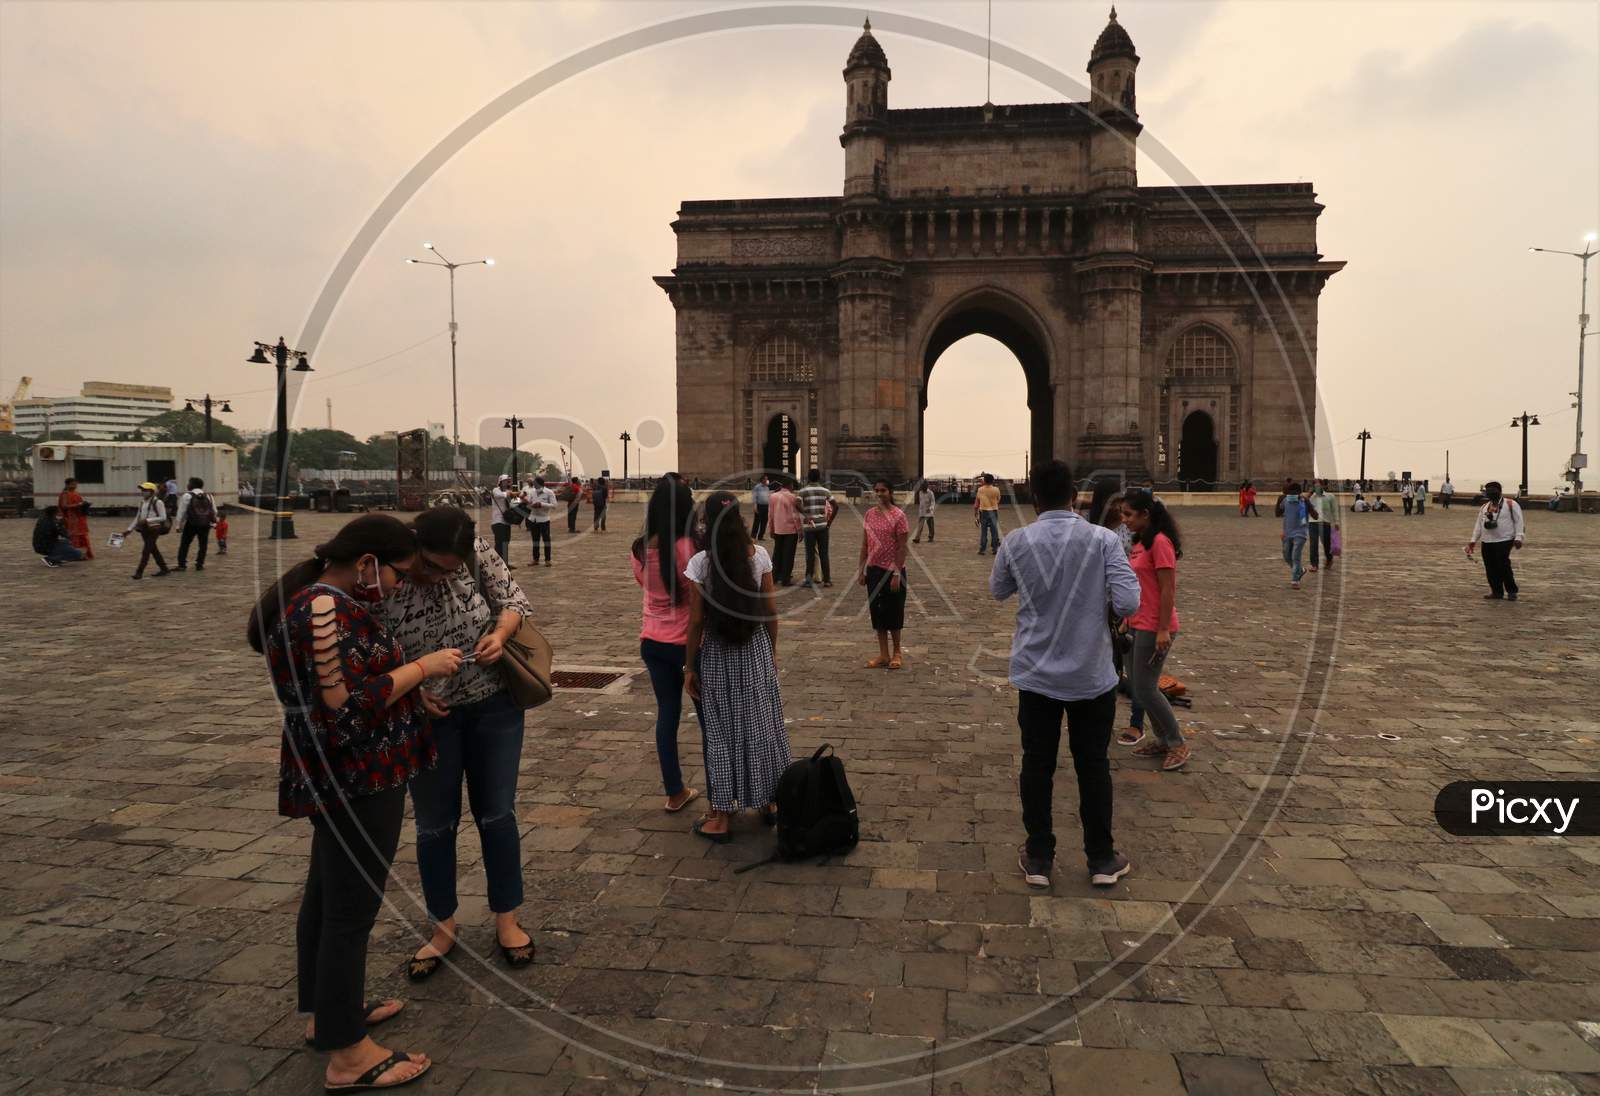 People visit the Gateway of India, after it was reopened for public, amidst the spread of the coronavirus disease (COVID-19) in Mumbai, India, October, 2020.